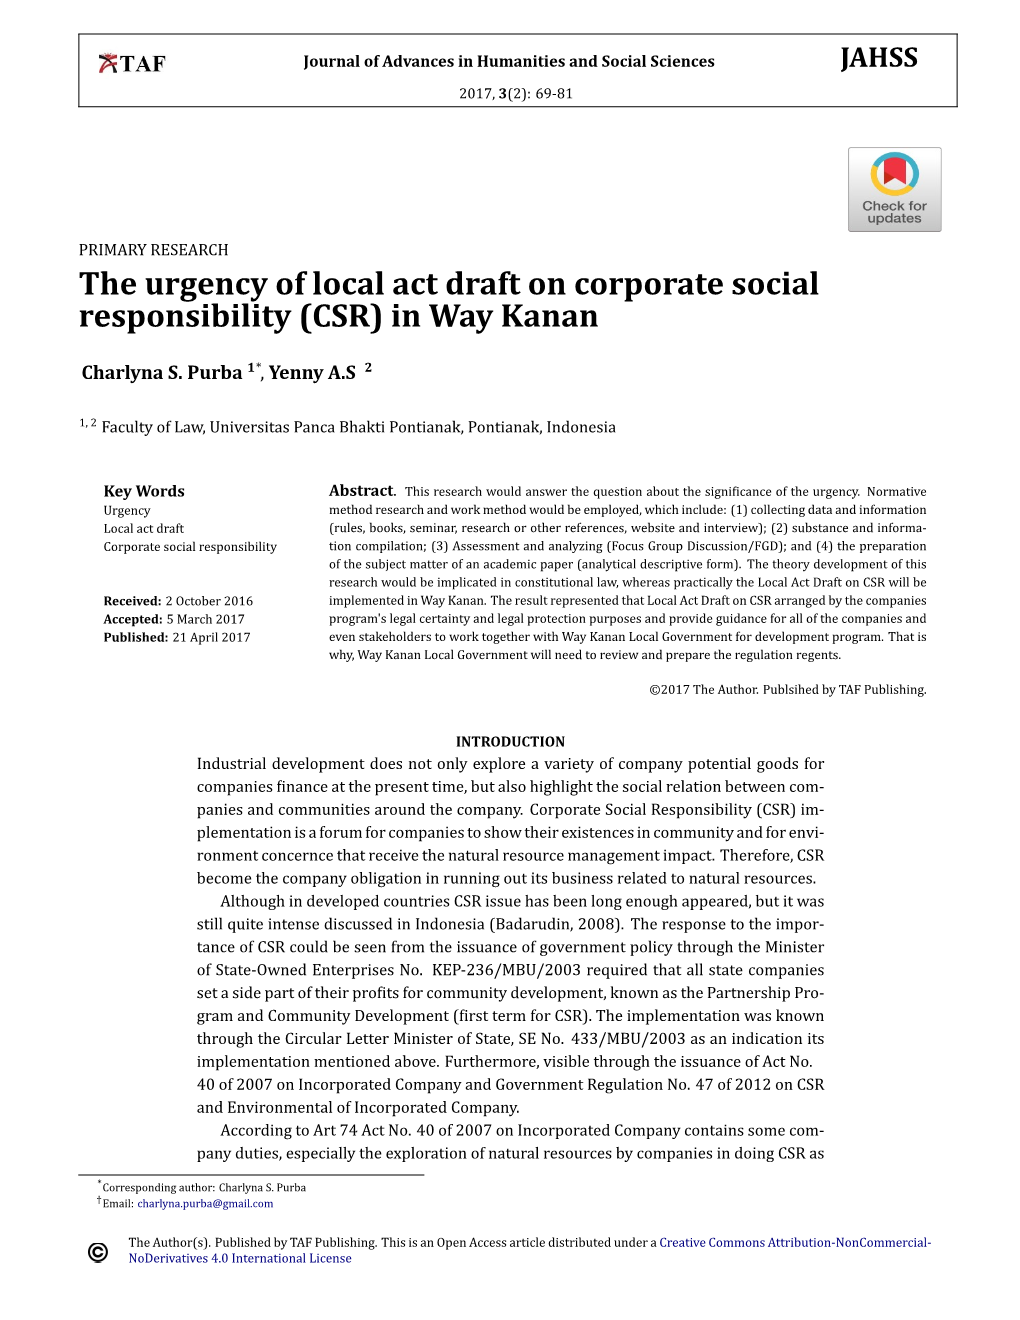 The Urgency of Local Act Draft on Corporate Social Responsibility (CSR) in Way Kanan